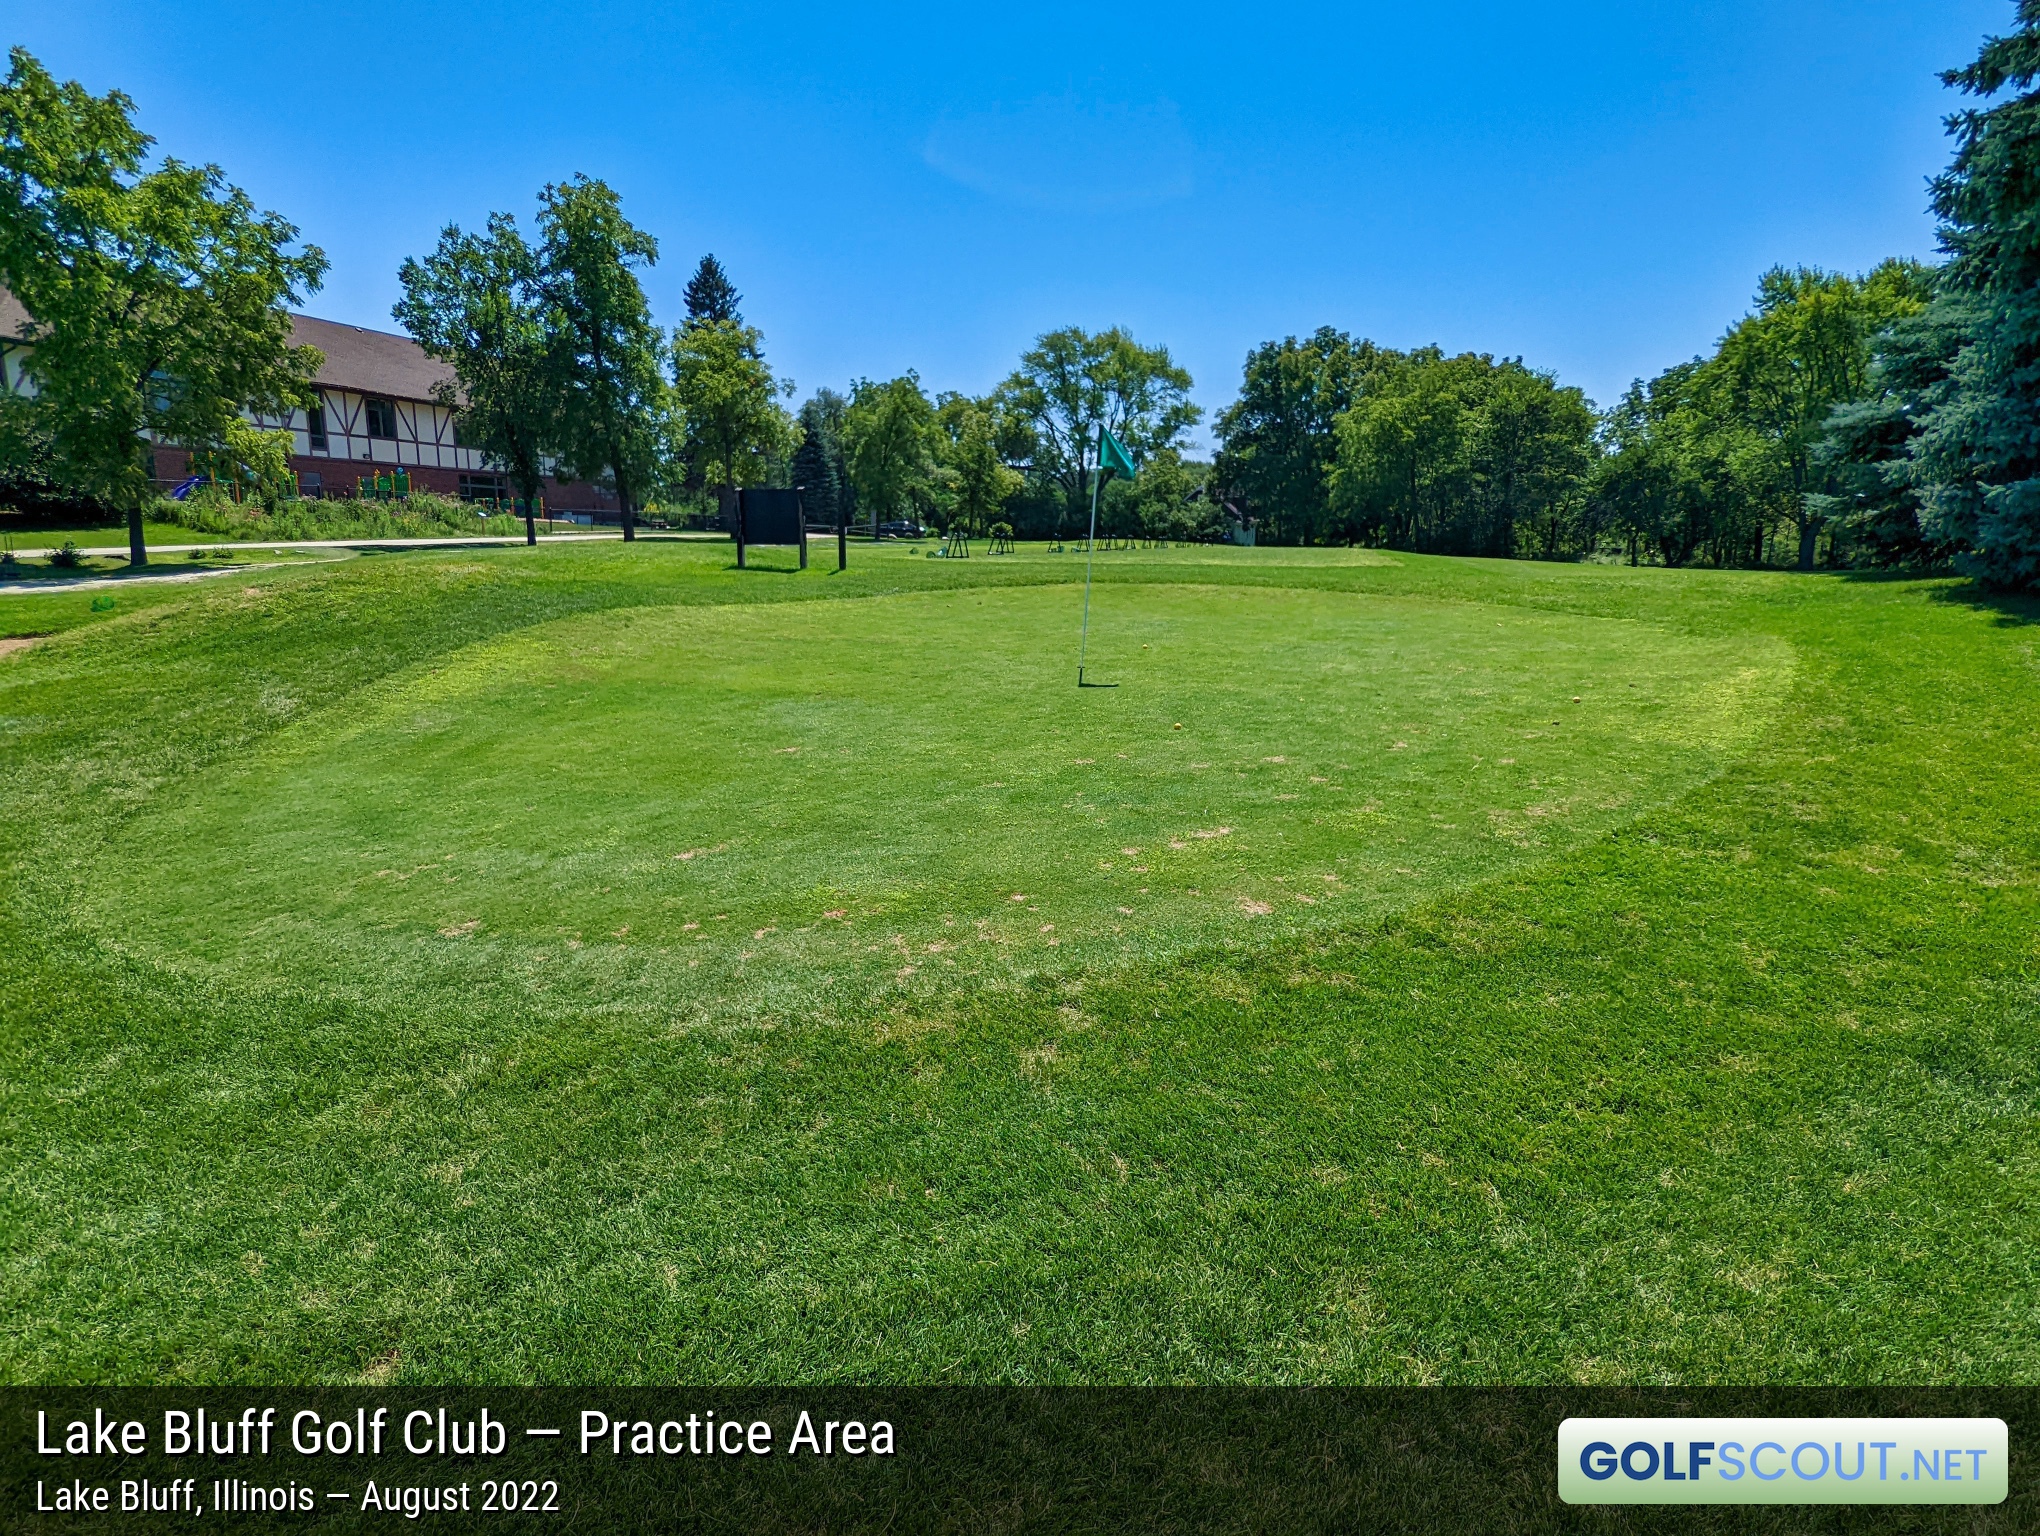 Photo of the practice area at Lake Bluff Golf Club in Lake Bluff, Illinois. 